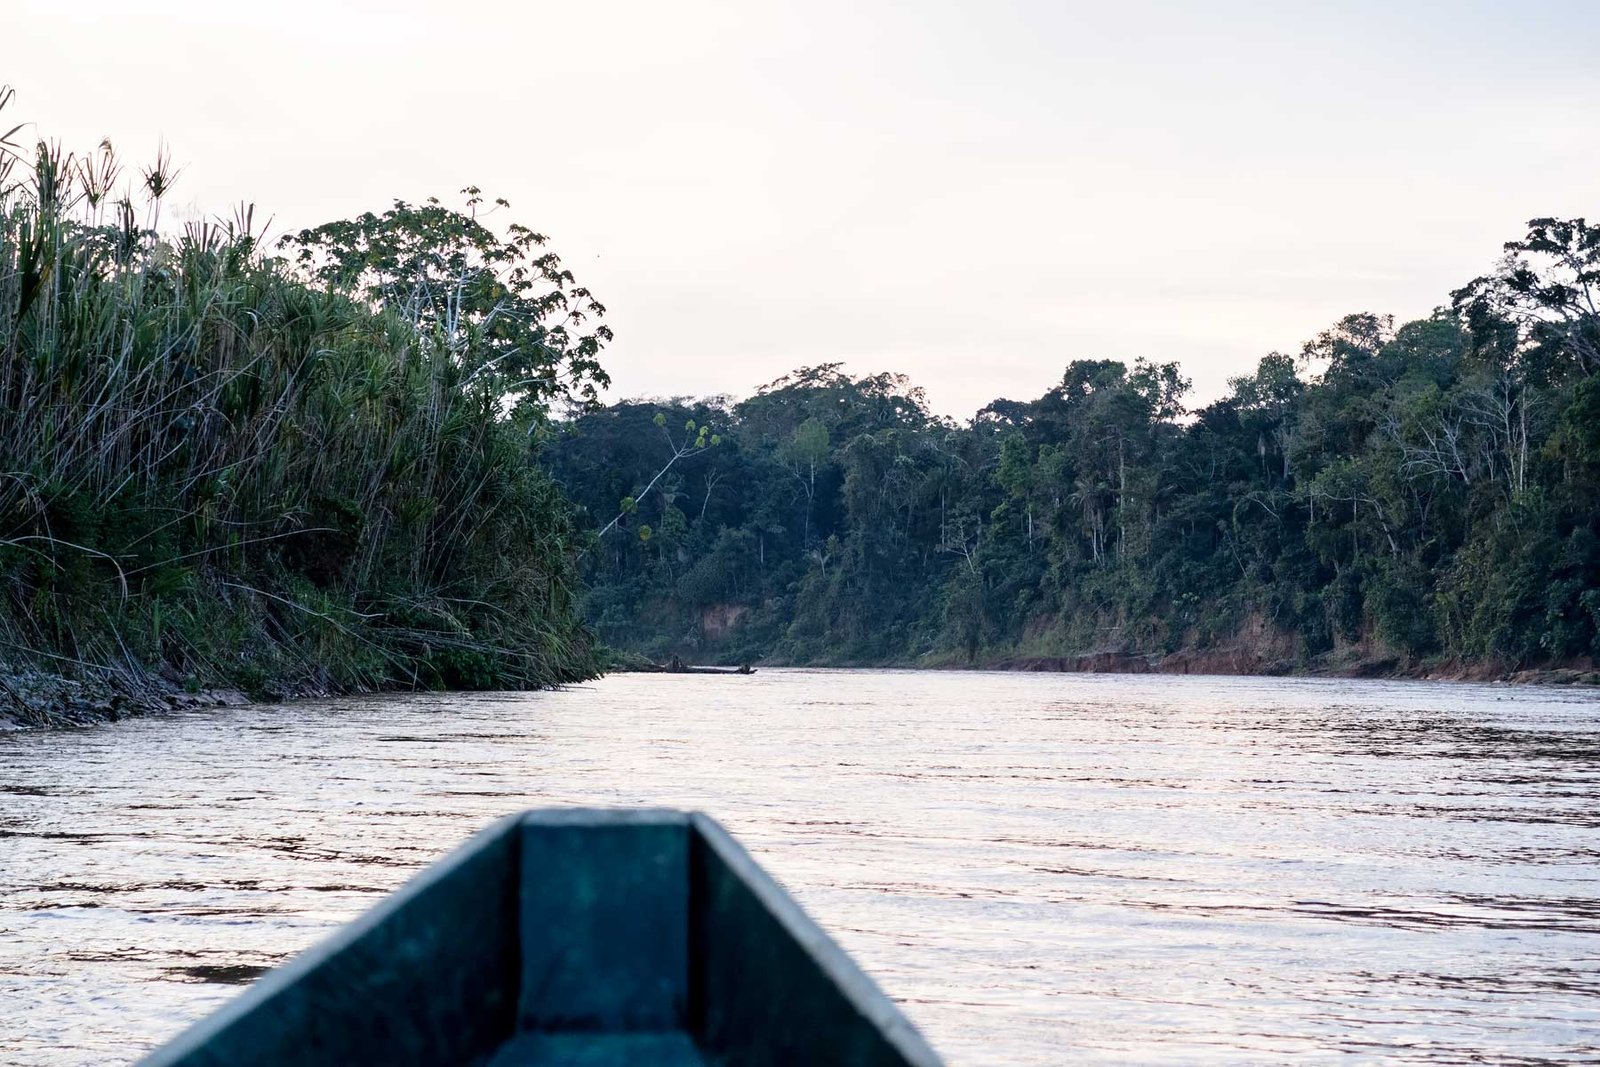 From Rurrenabaque a boat will take you to Madidi National Park